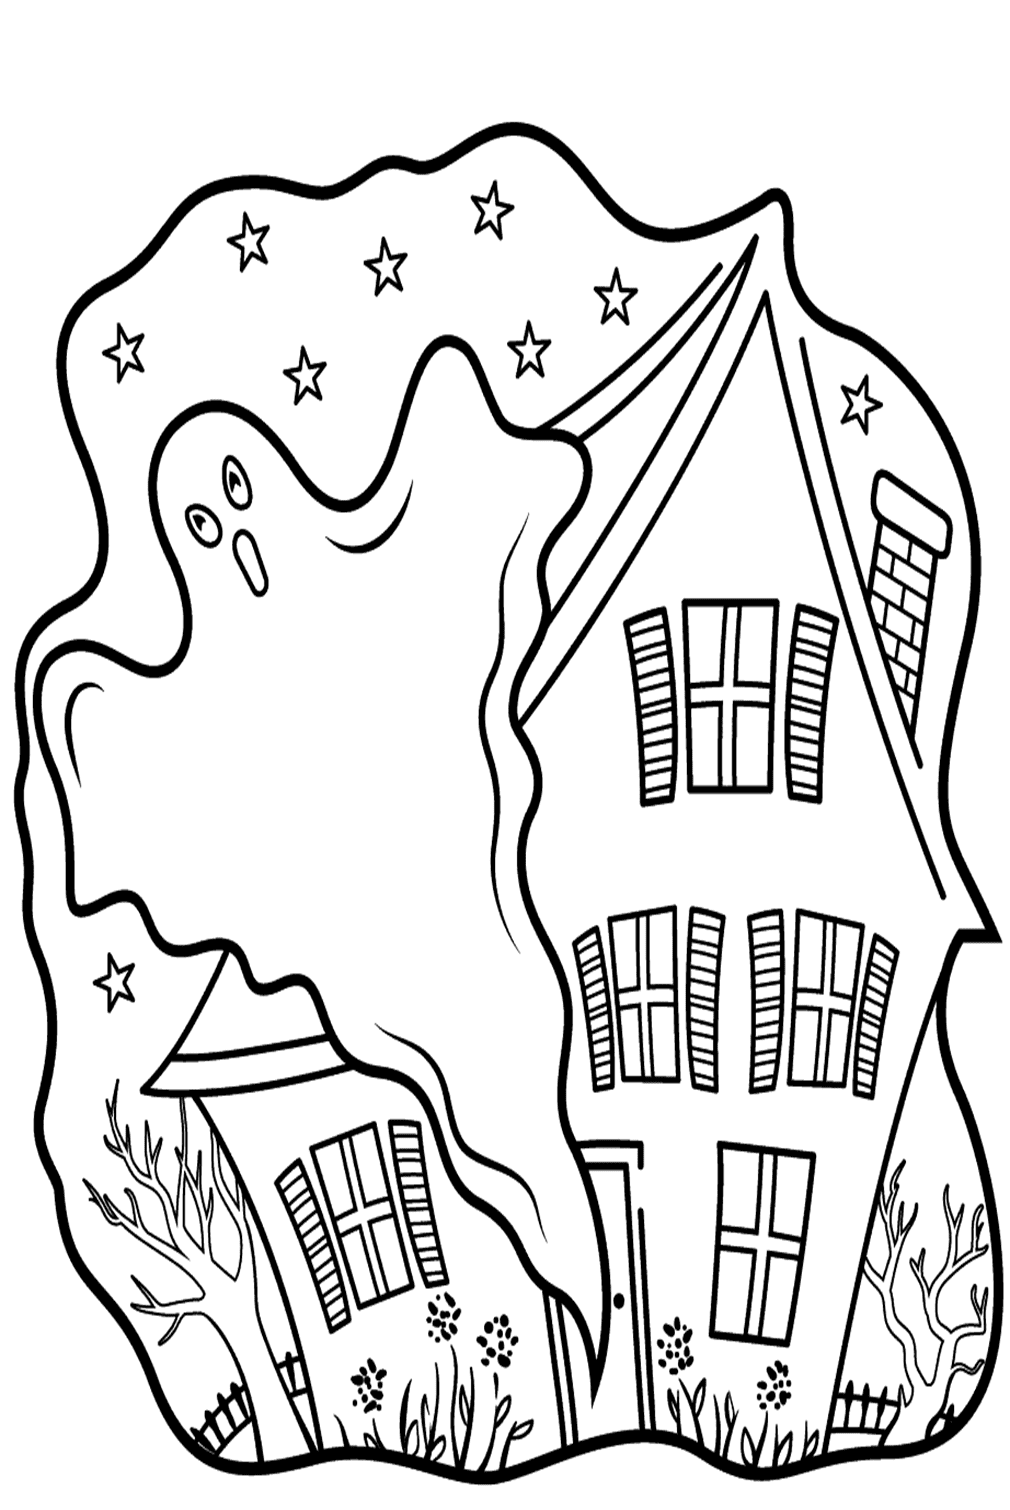 Ghost Coloring Page Free - Ghost Coloring Pages - Coloring Pages For ...